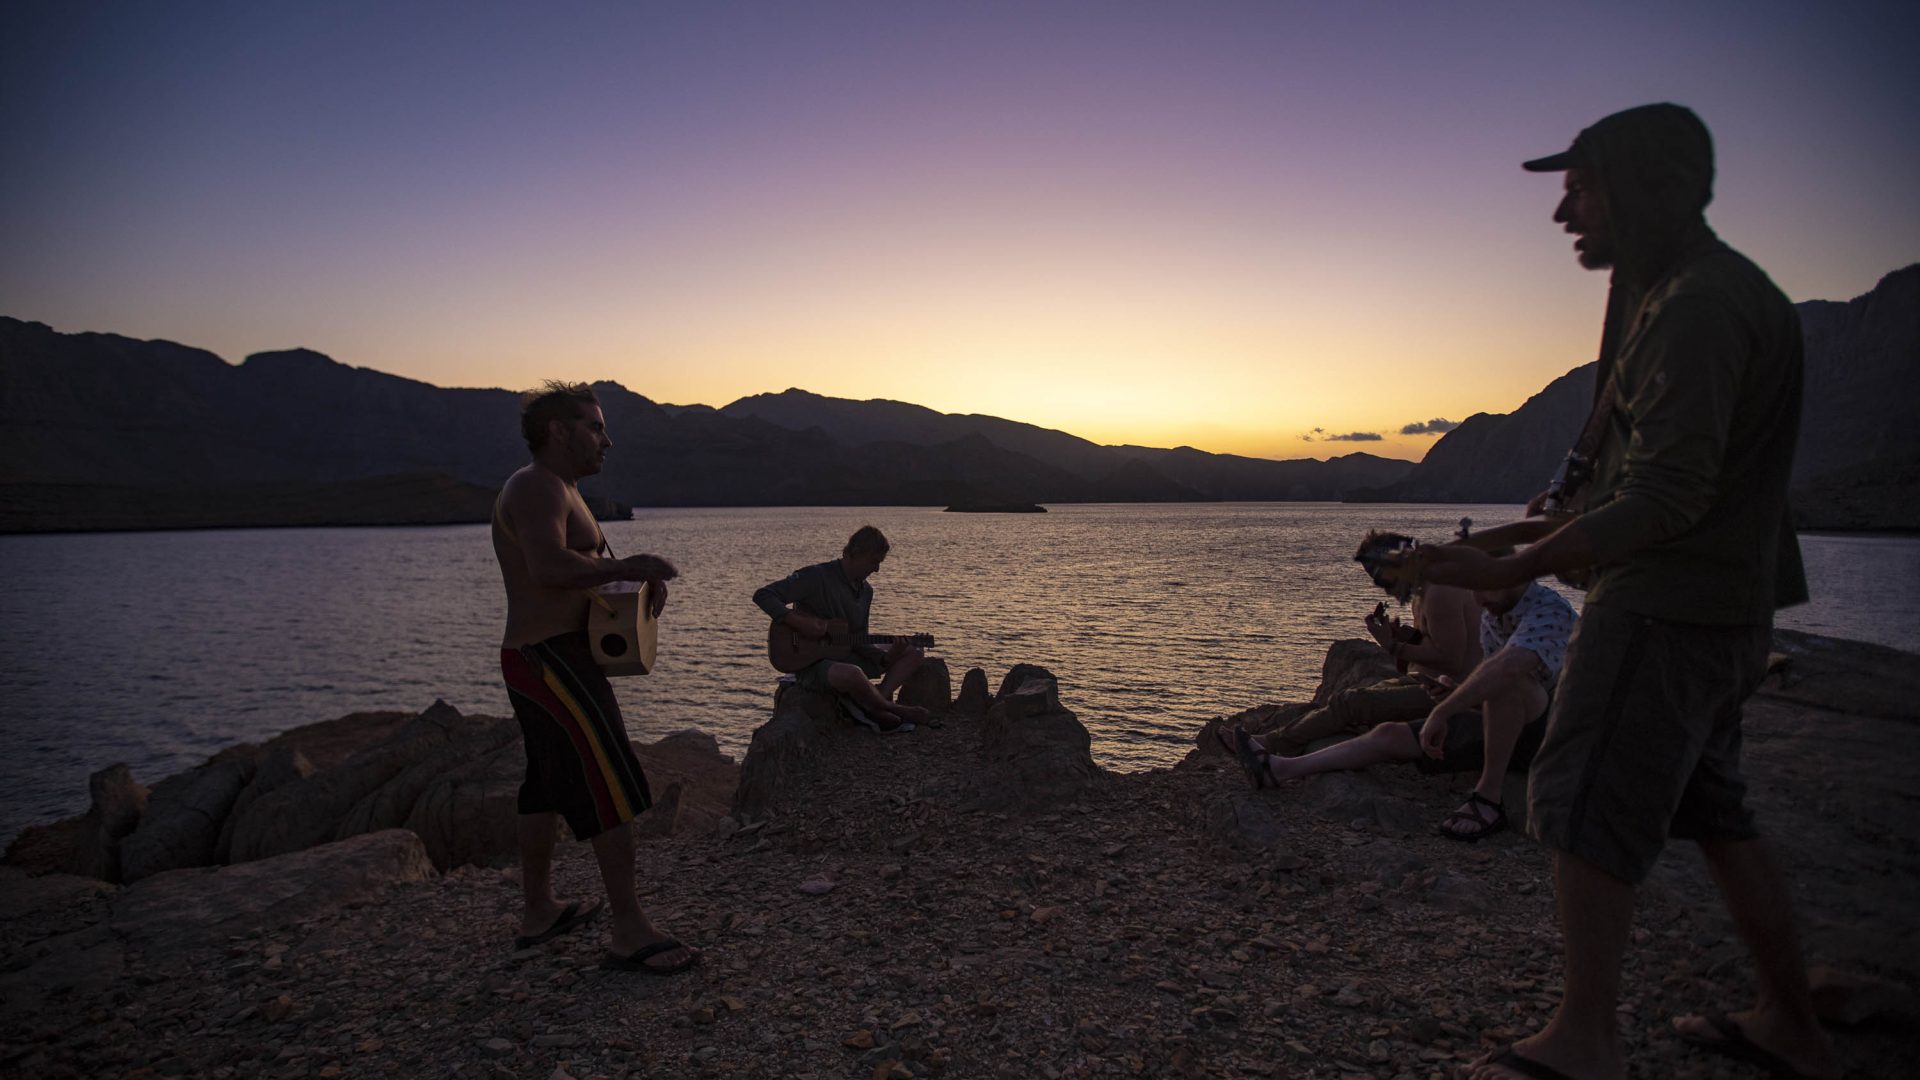 A group of friends play their banjos as dusk falls.